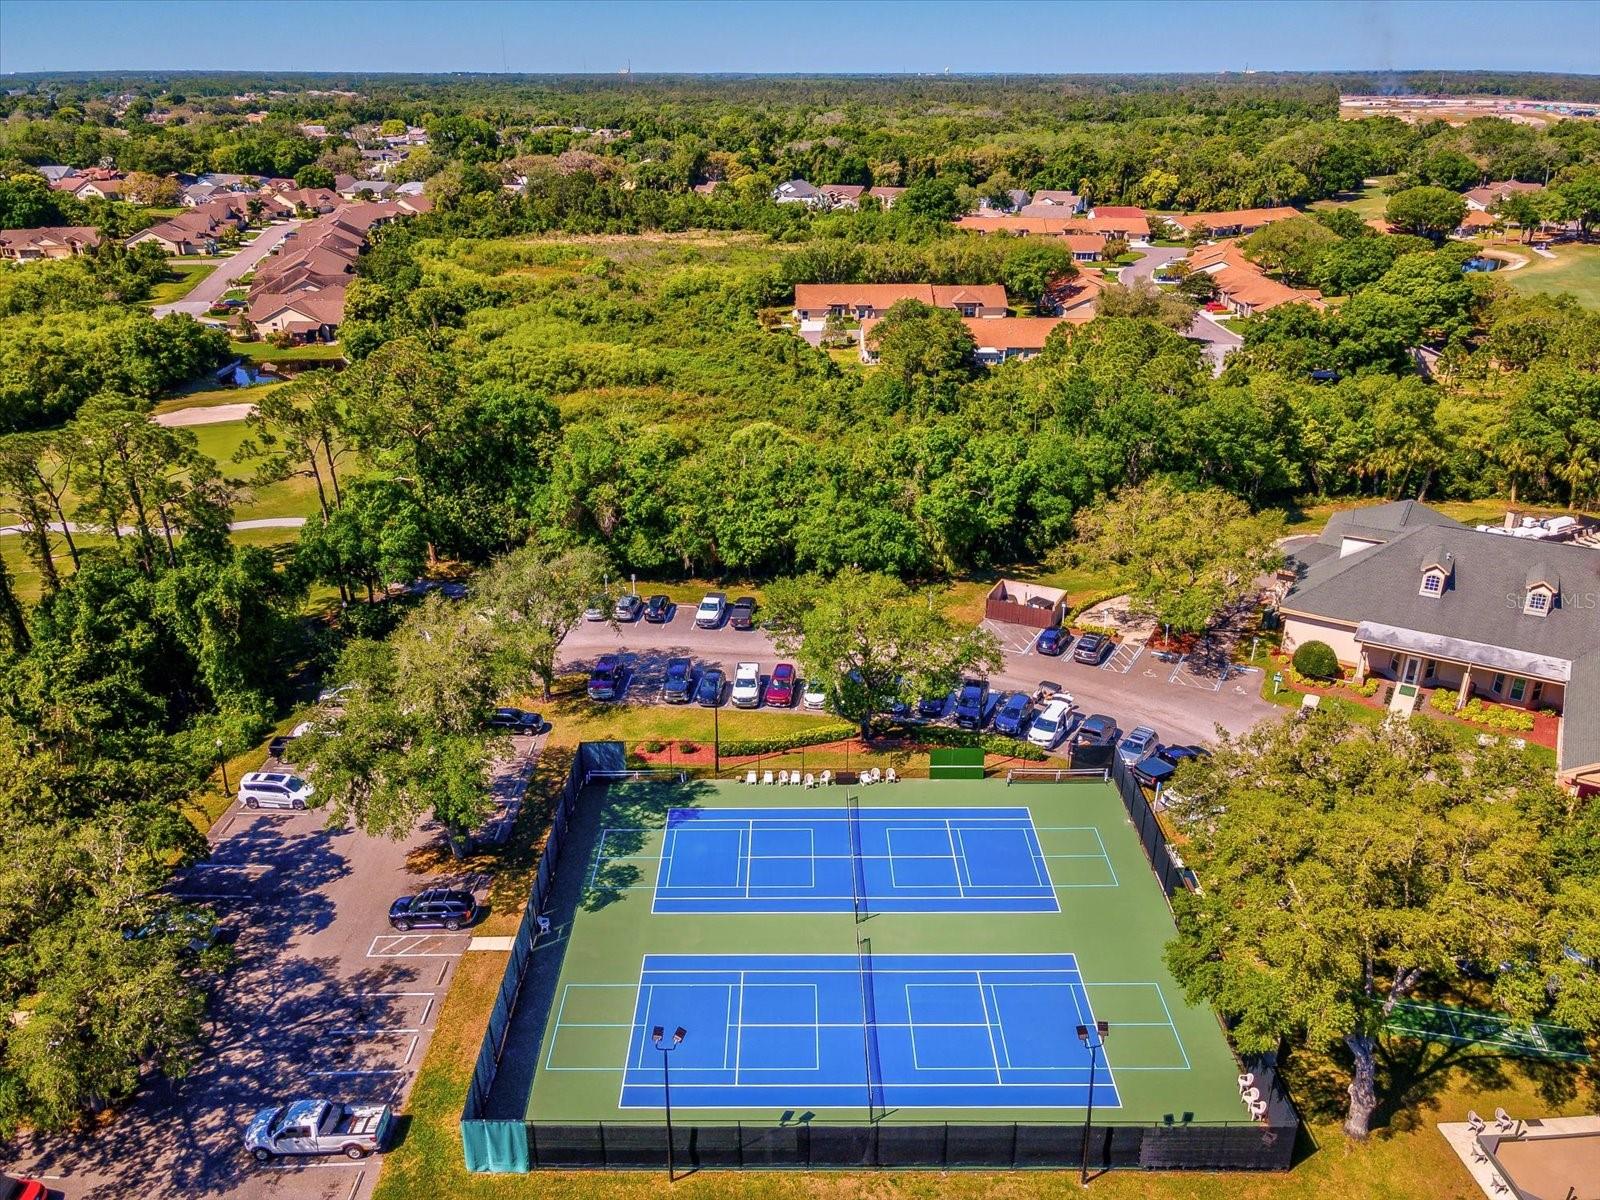 Drone views of surrounding homes and tennis/pickleball courts